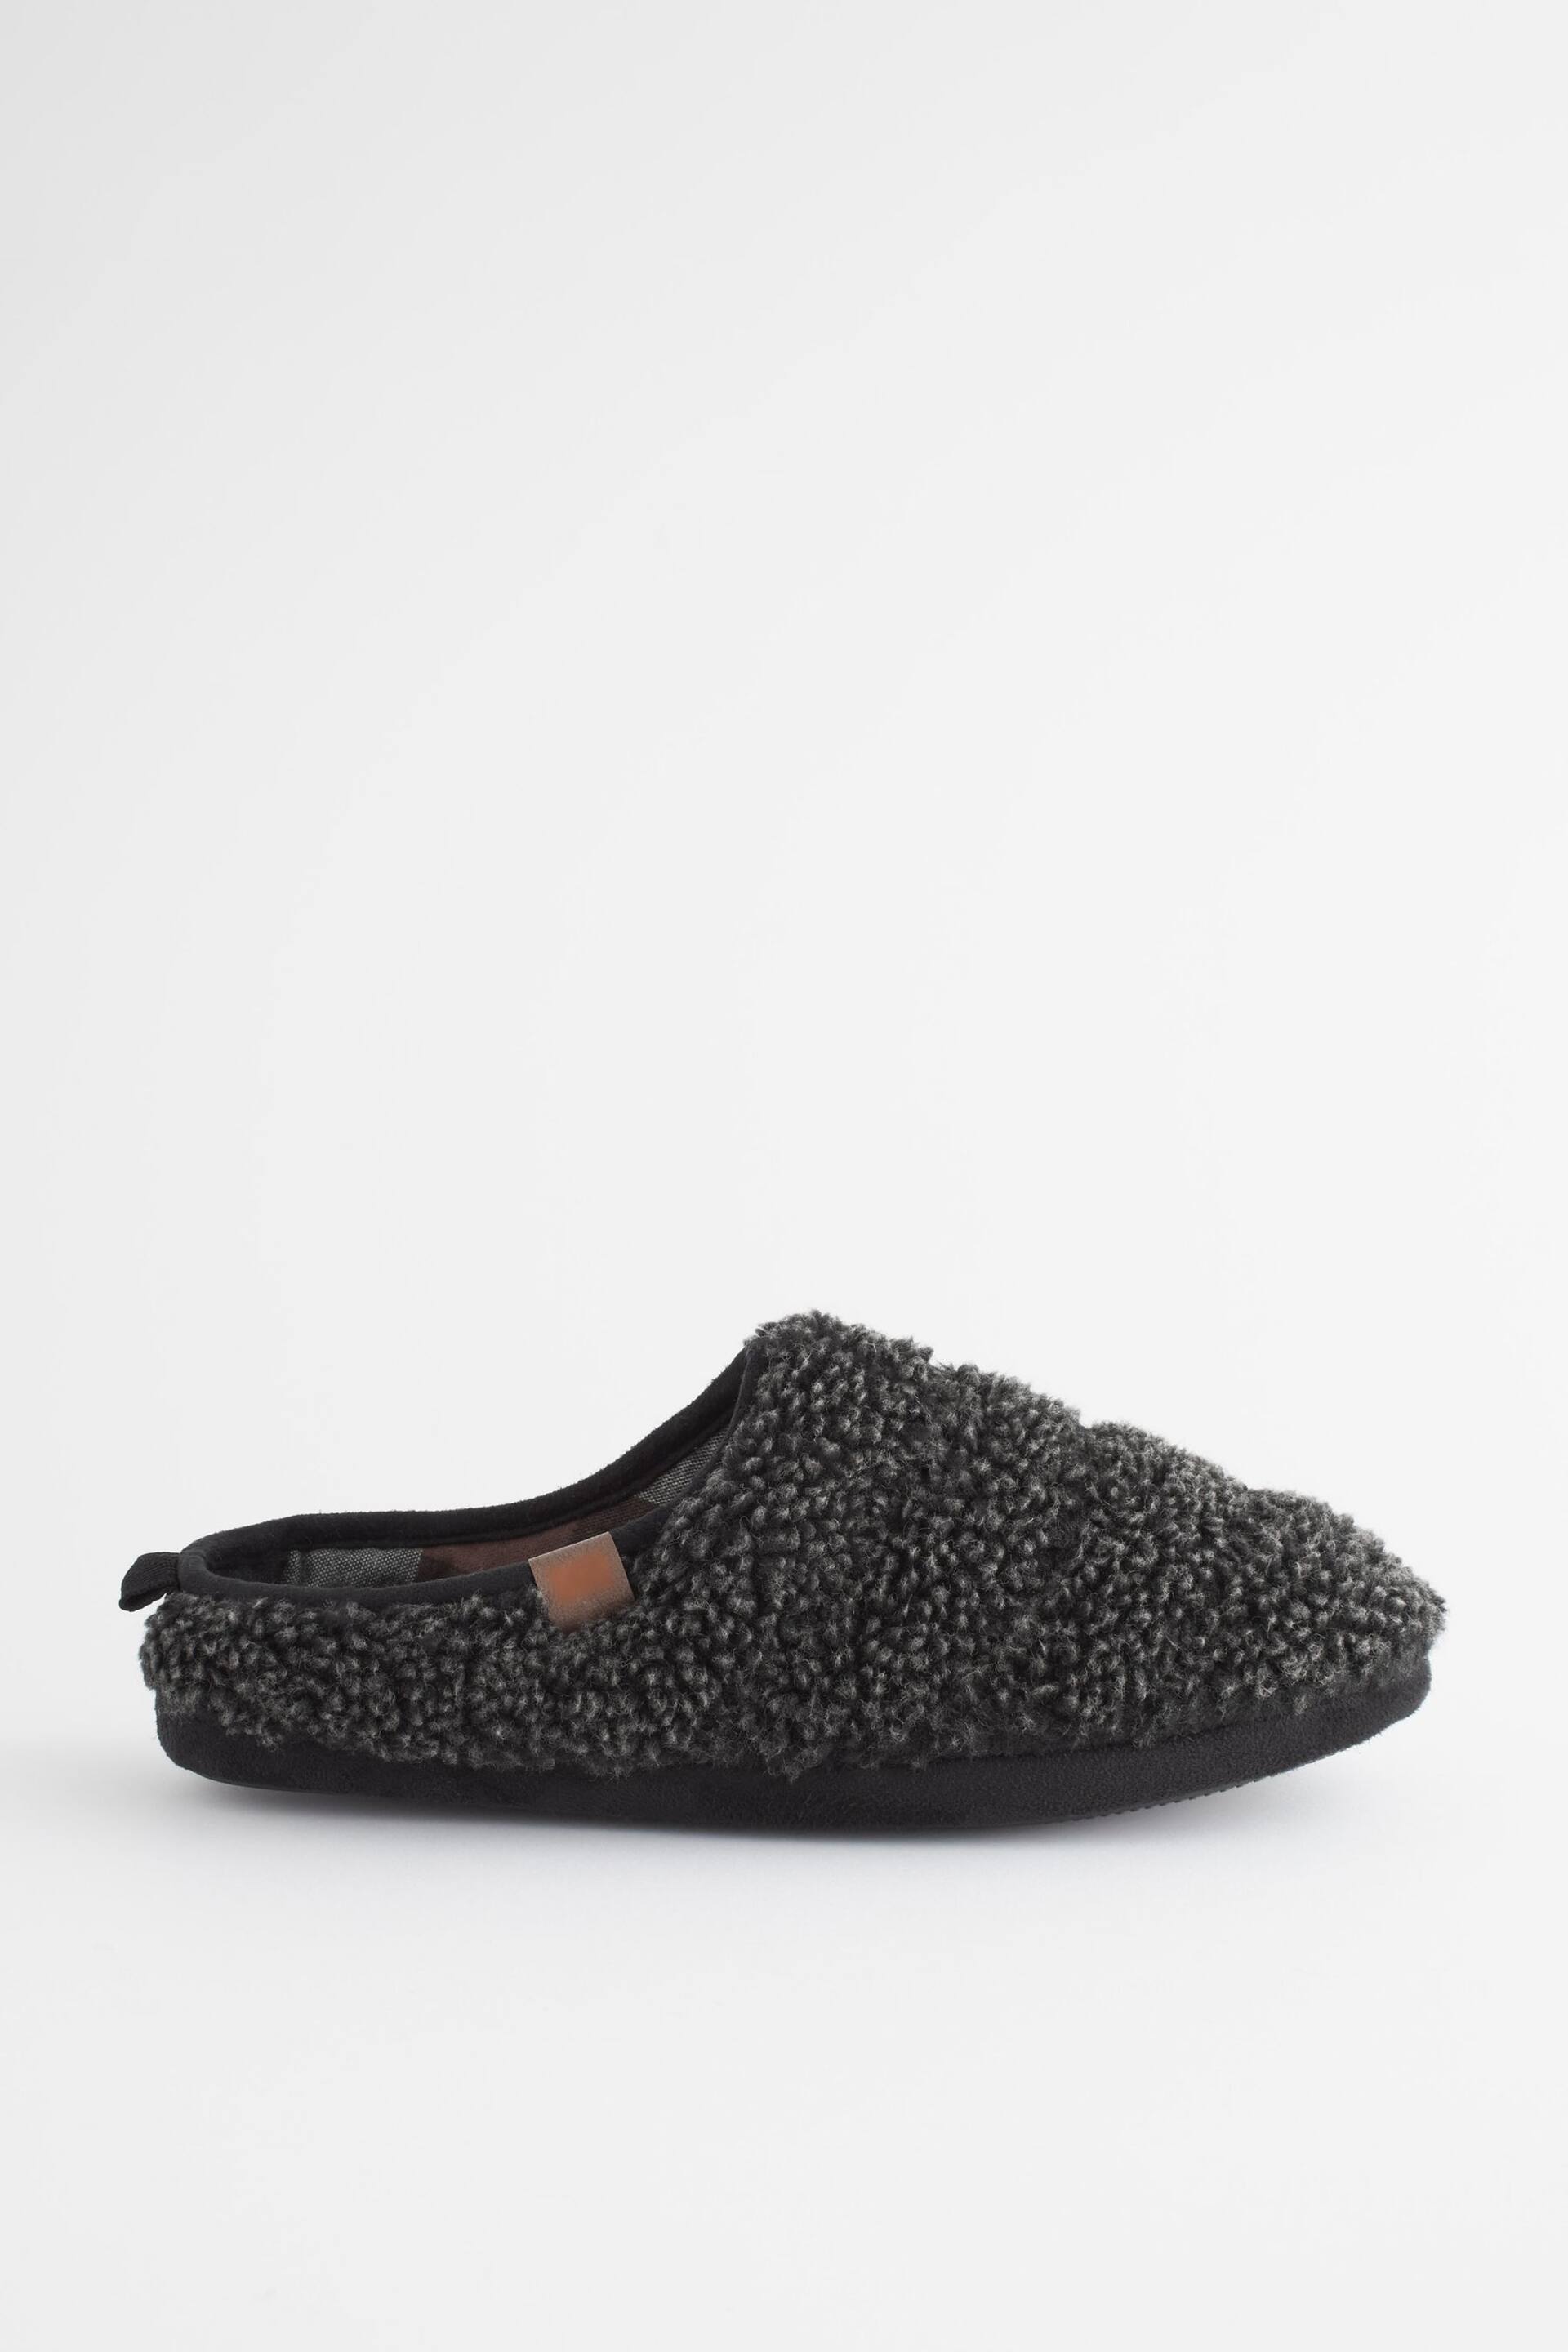 Charcoal Grey Padded Borg Mule Slippers - Image 2 of 7